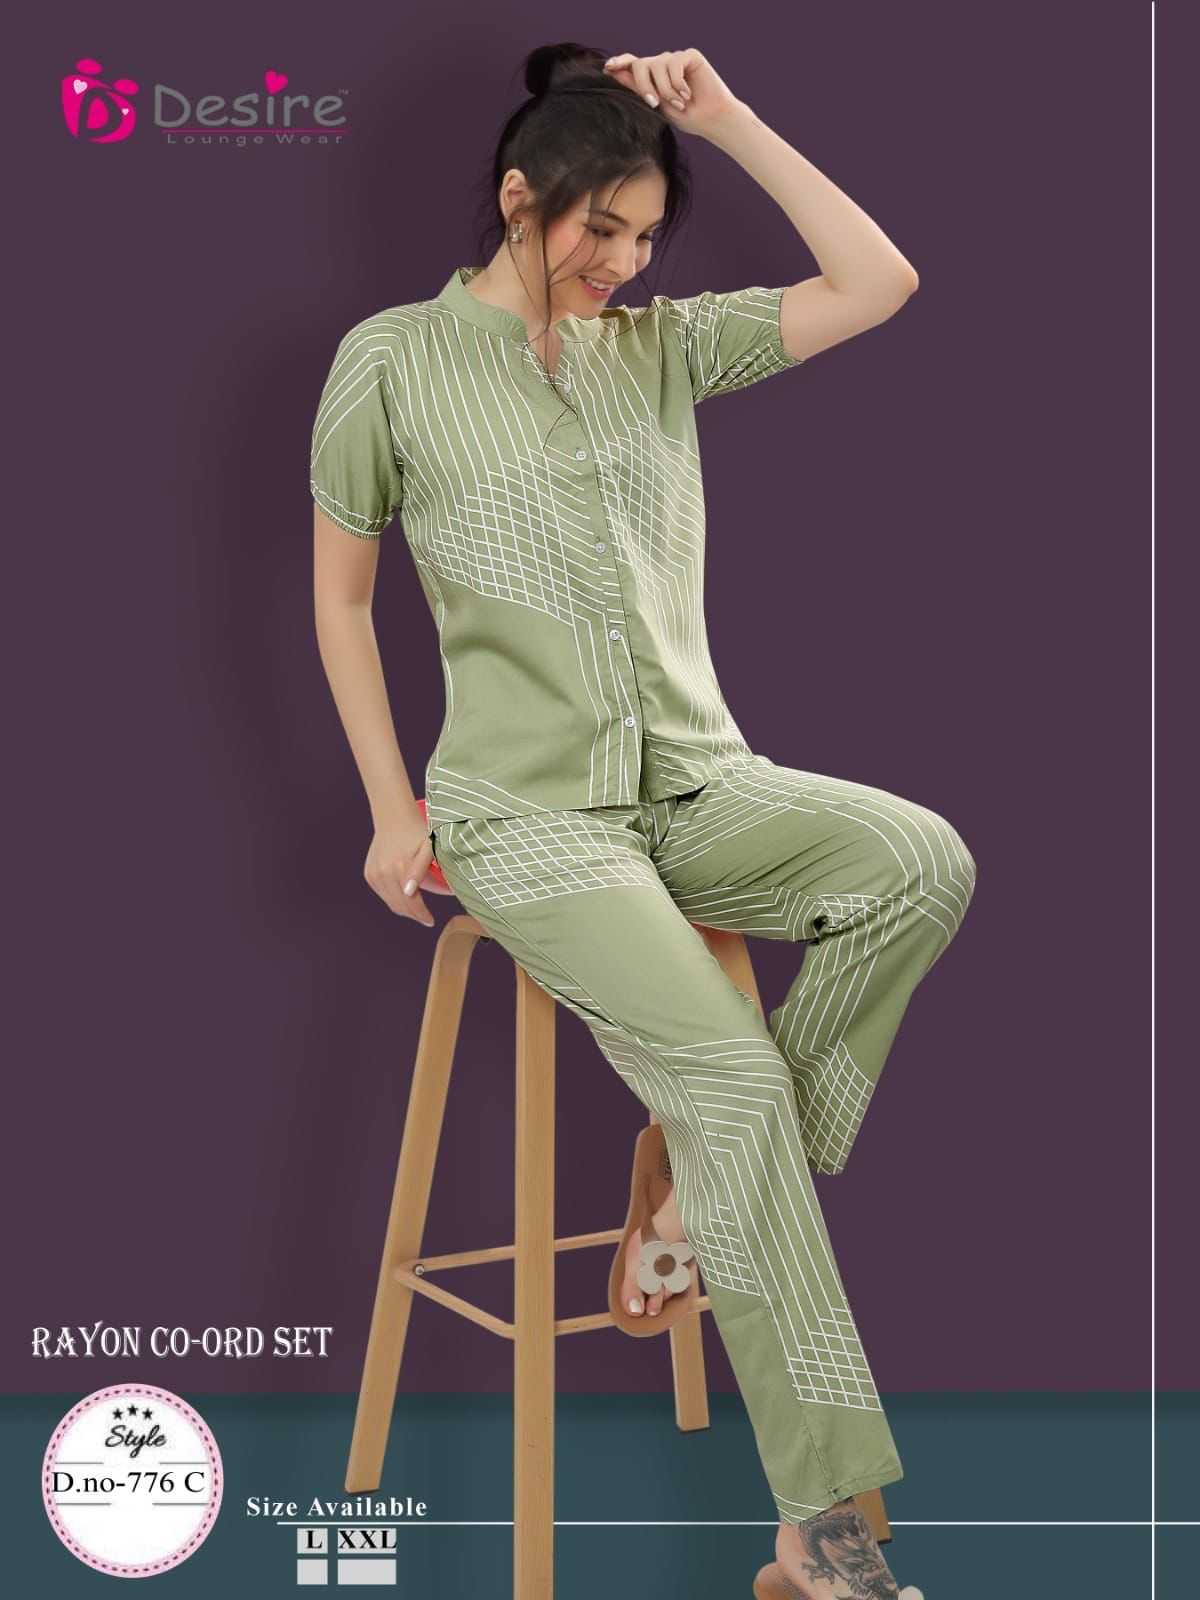 desire rayon cord set 774-776 readymade front open women night suit